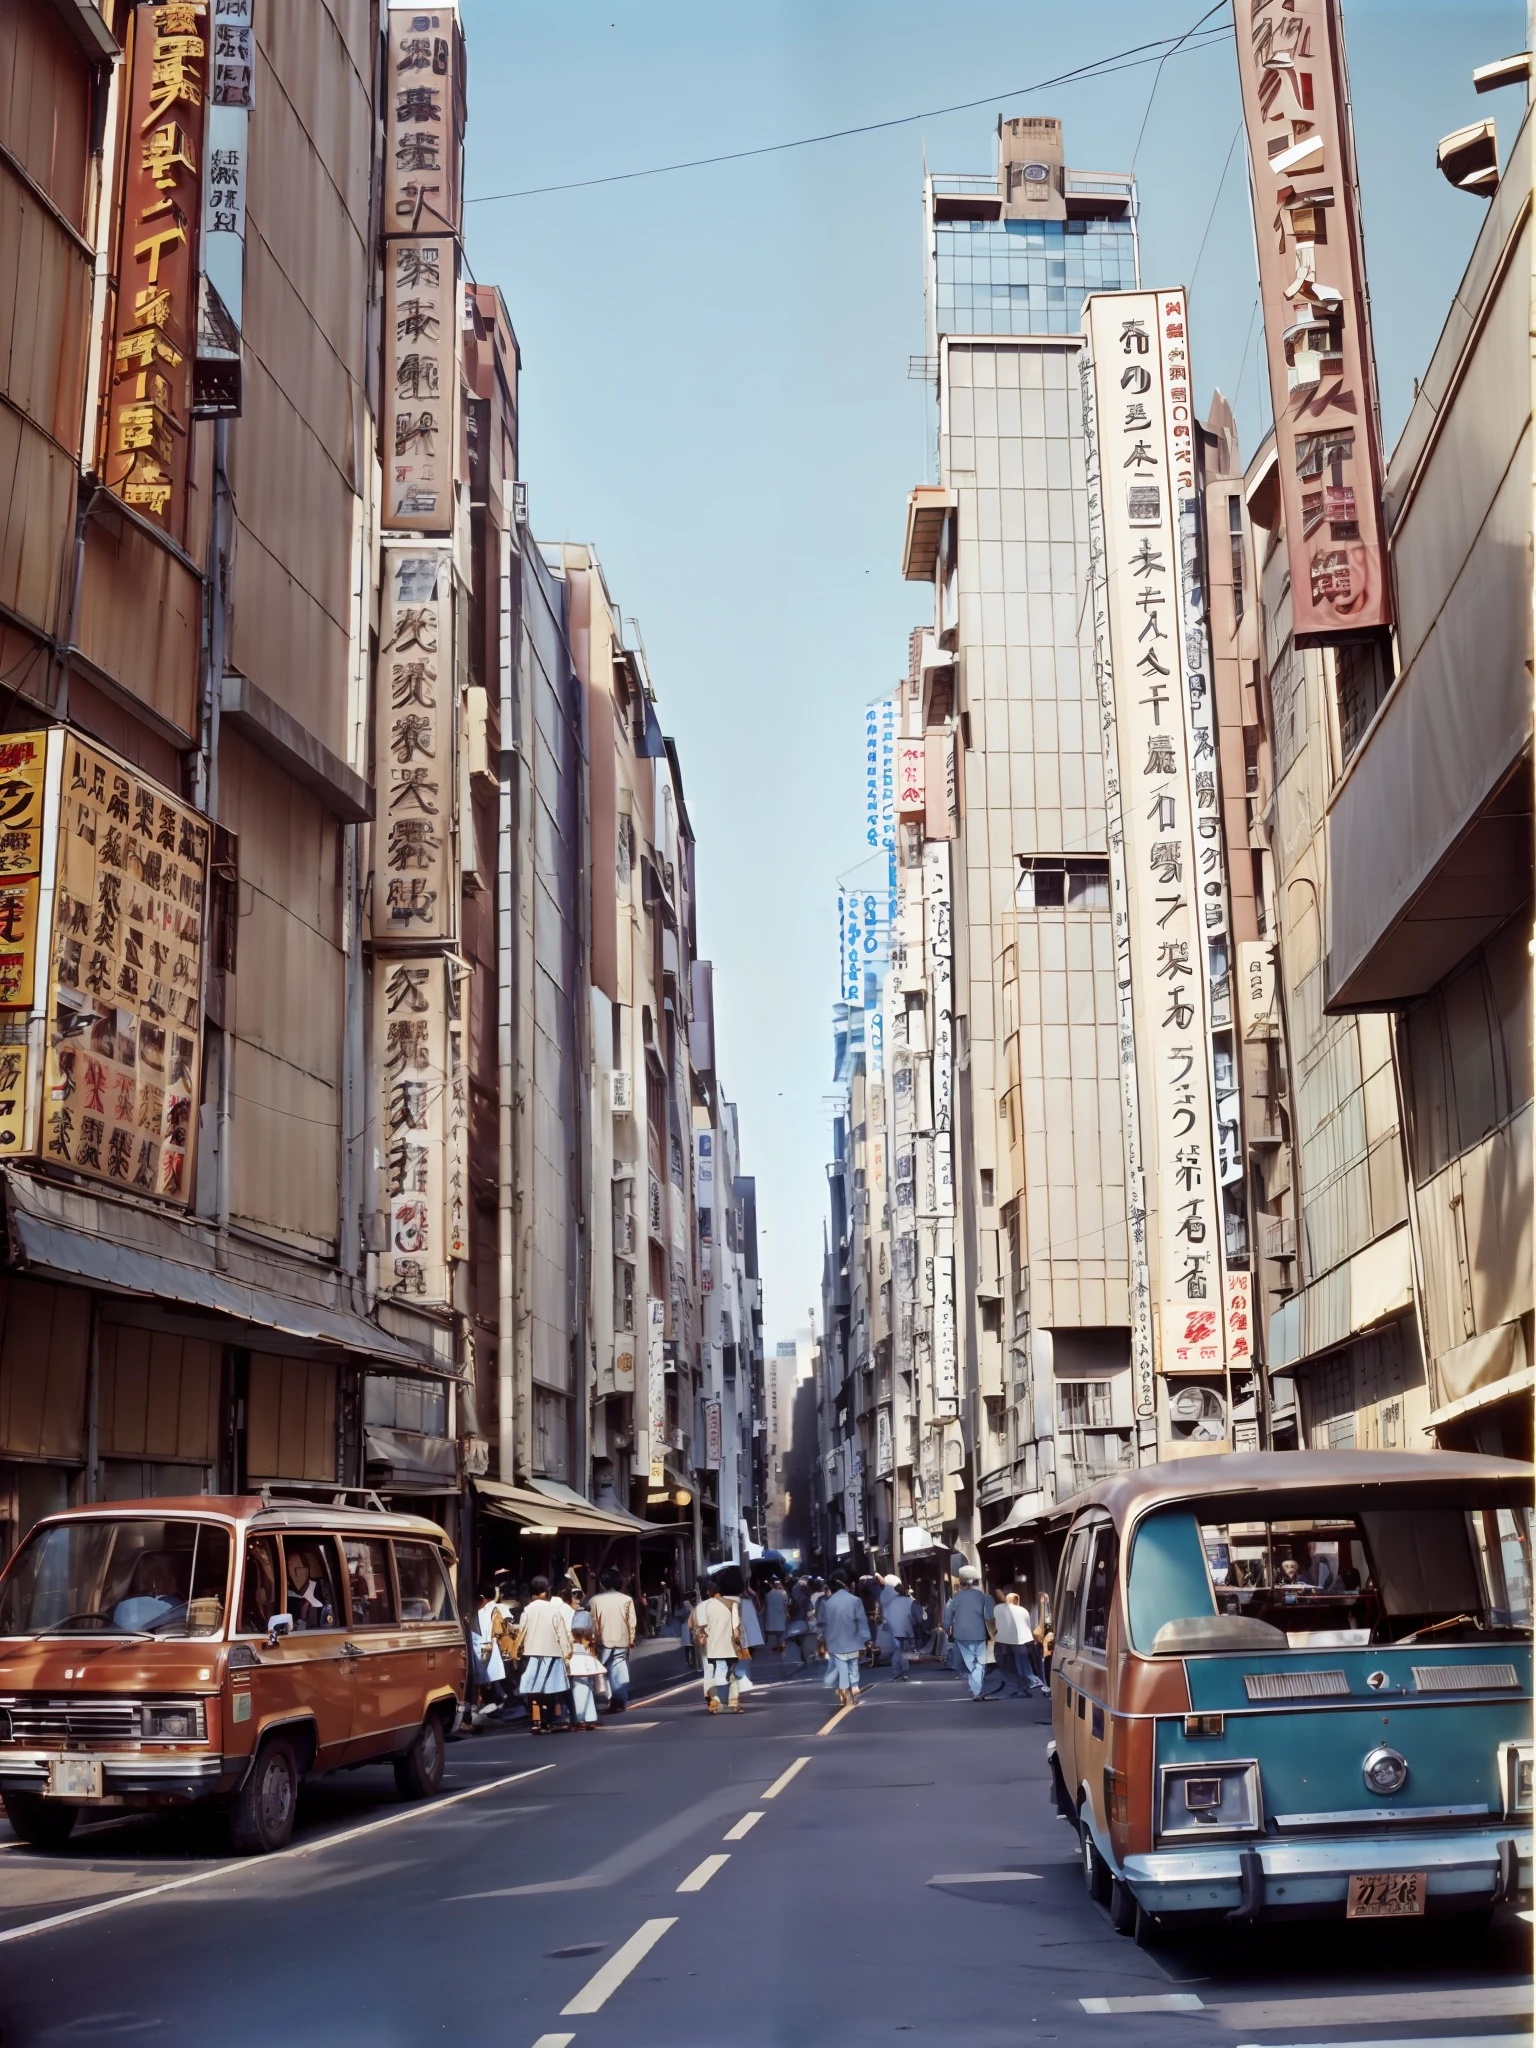 There are a lot of cars and people on the city streets, Japan 1980s, downtown Japan, streets of Tokyo, streets of Japan, vintage footage of streets of Tokyo, streets of Tokyo set in 1982, streets of Tokyo, photos of Japan in the 80s, streets of Japan, in the streets of Tokyo, Kodachrome : : 8 k, vintage photo, 1970s print